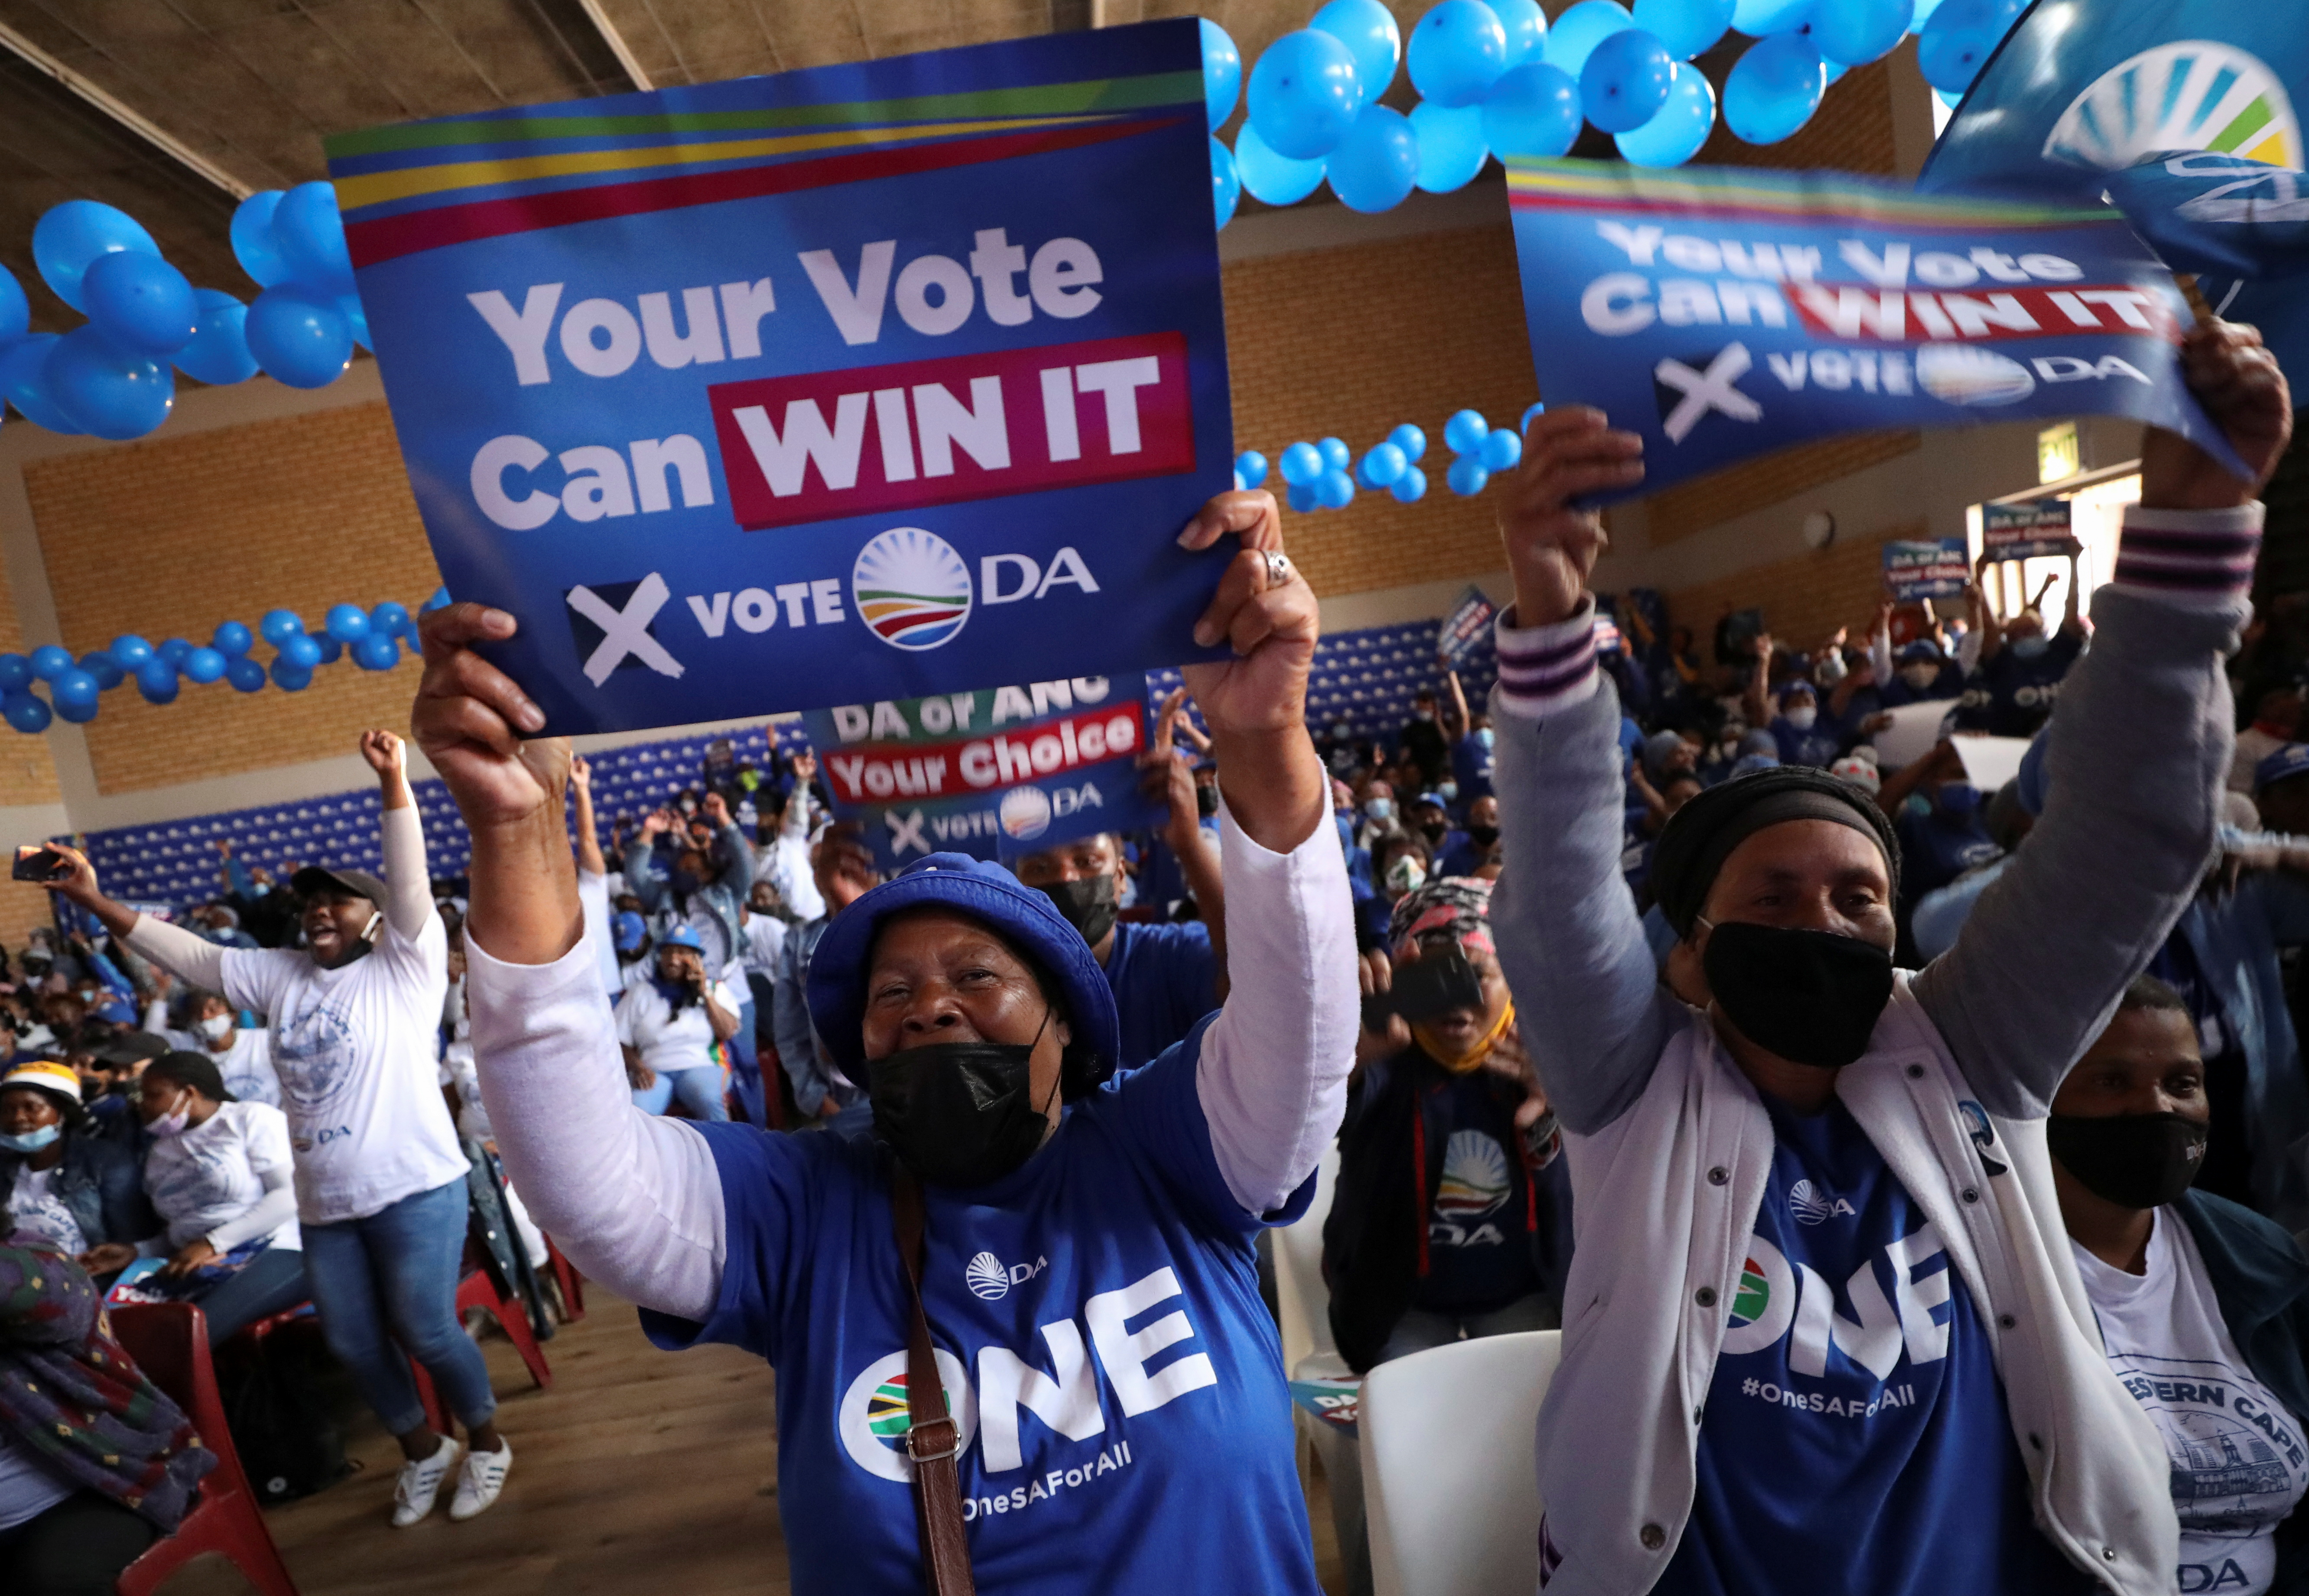 Supporters of the opposition Democratic Alliance (DA) party cheer at a rally ahead of the local government elections in Cape Town